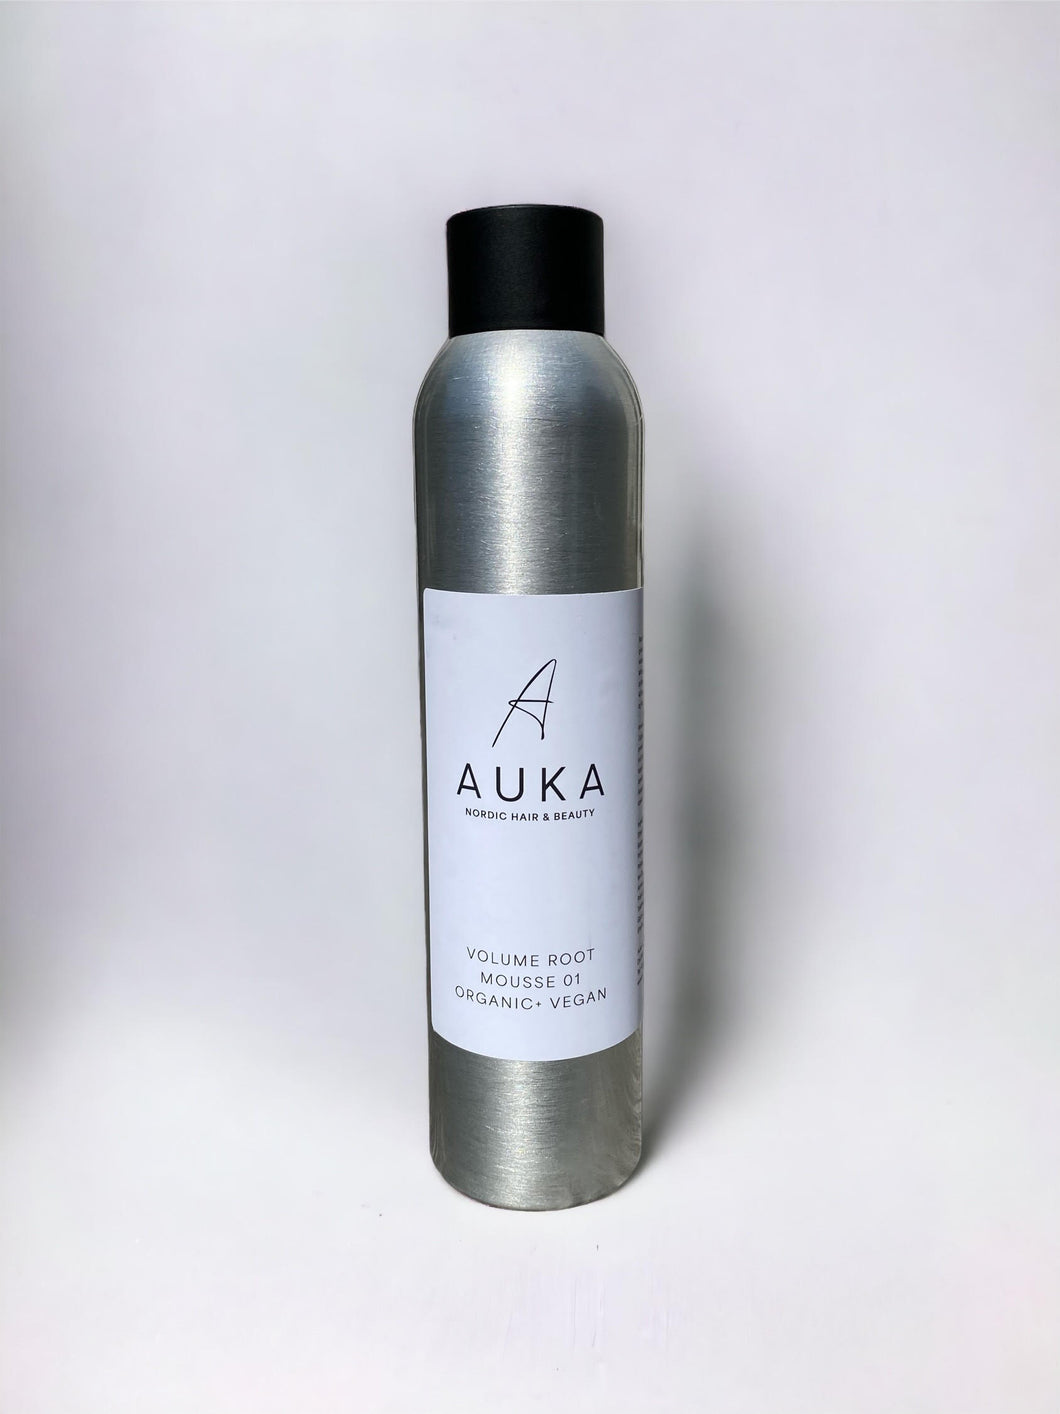 Auka Volume Root Mousse  01 *FORUDBESTILLING* - The Tan Co